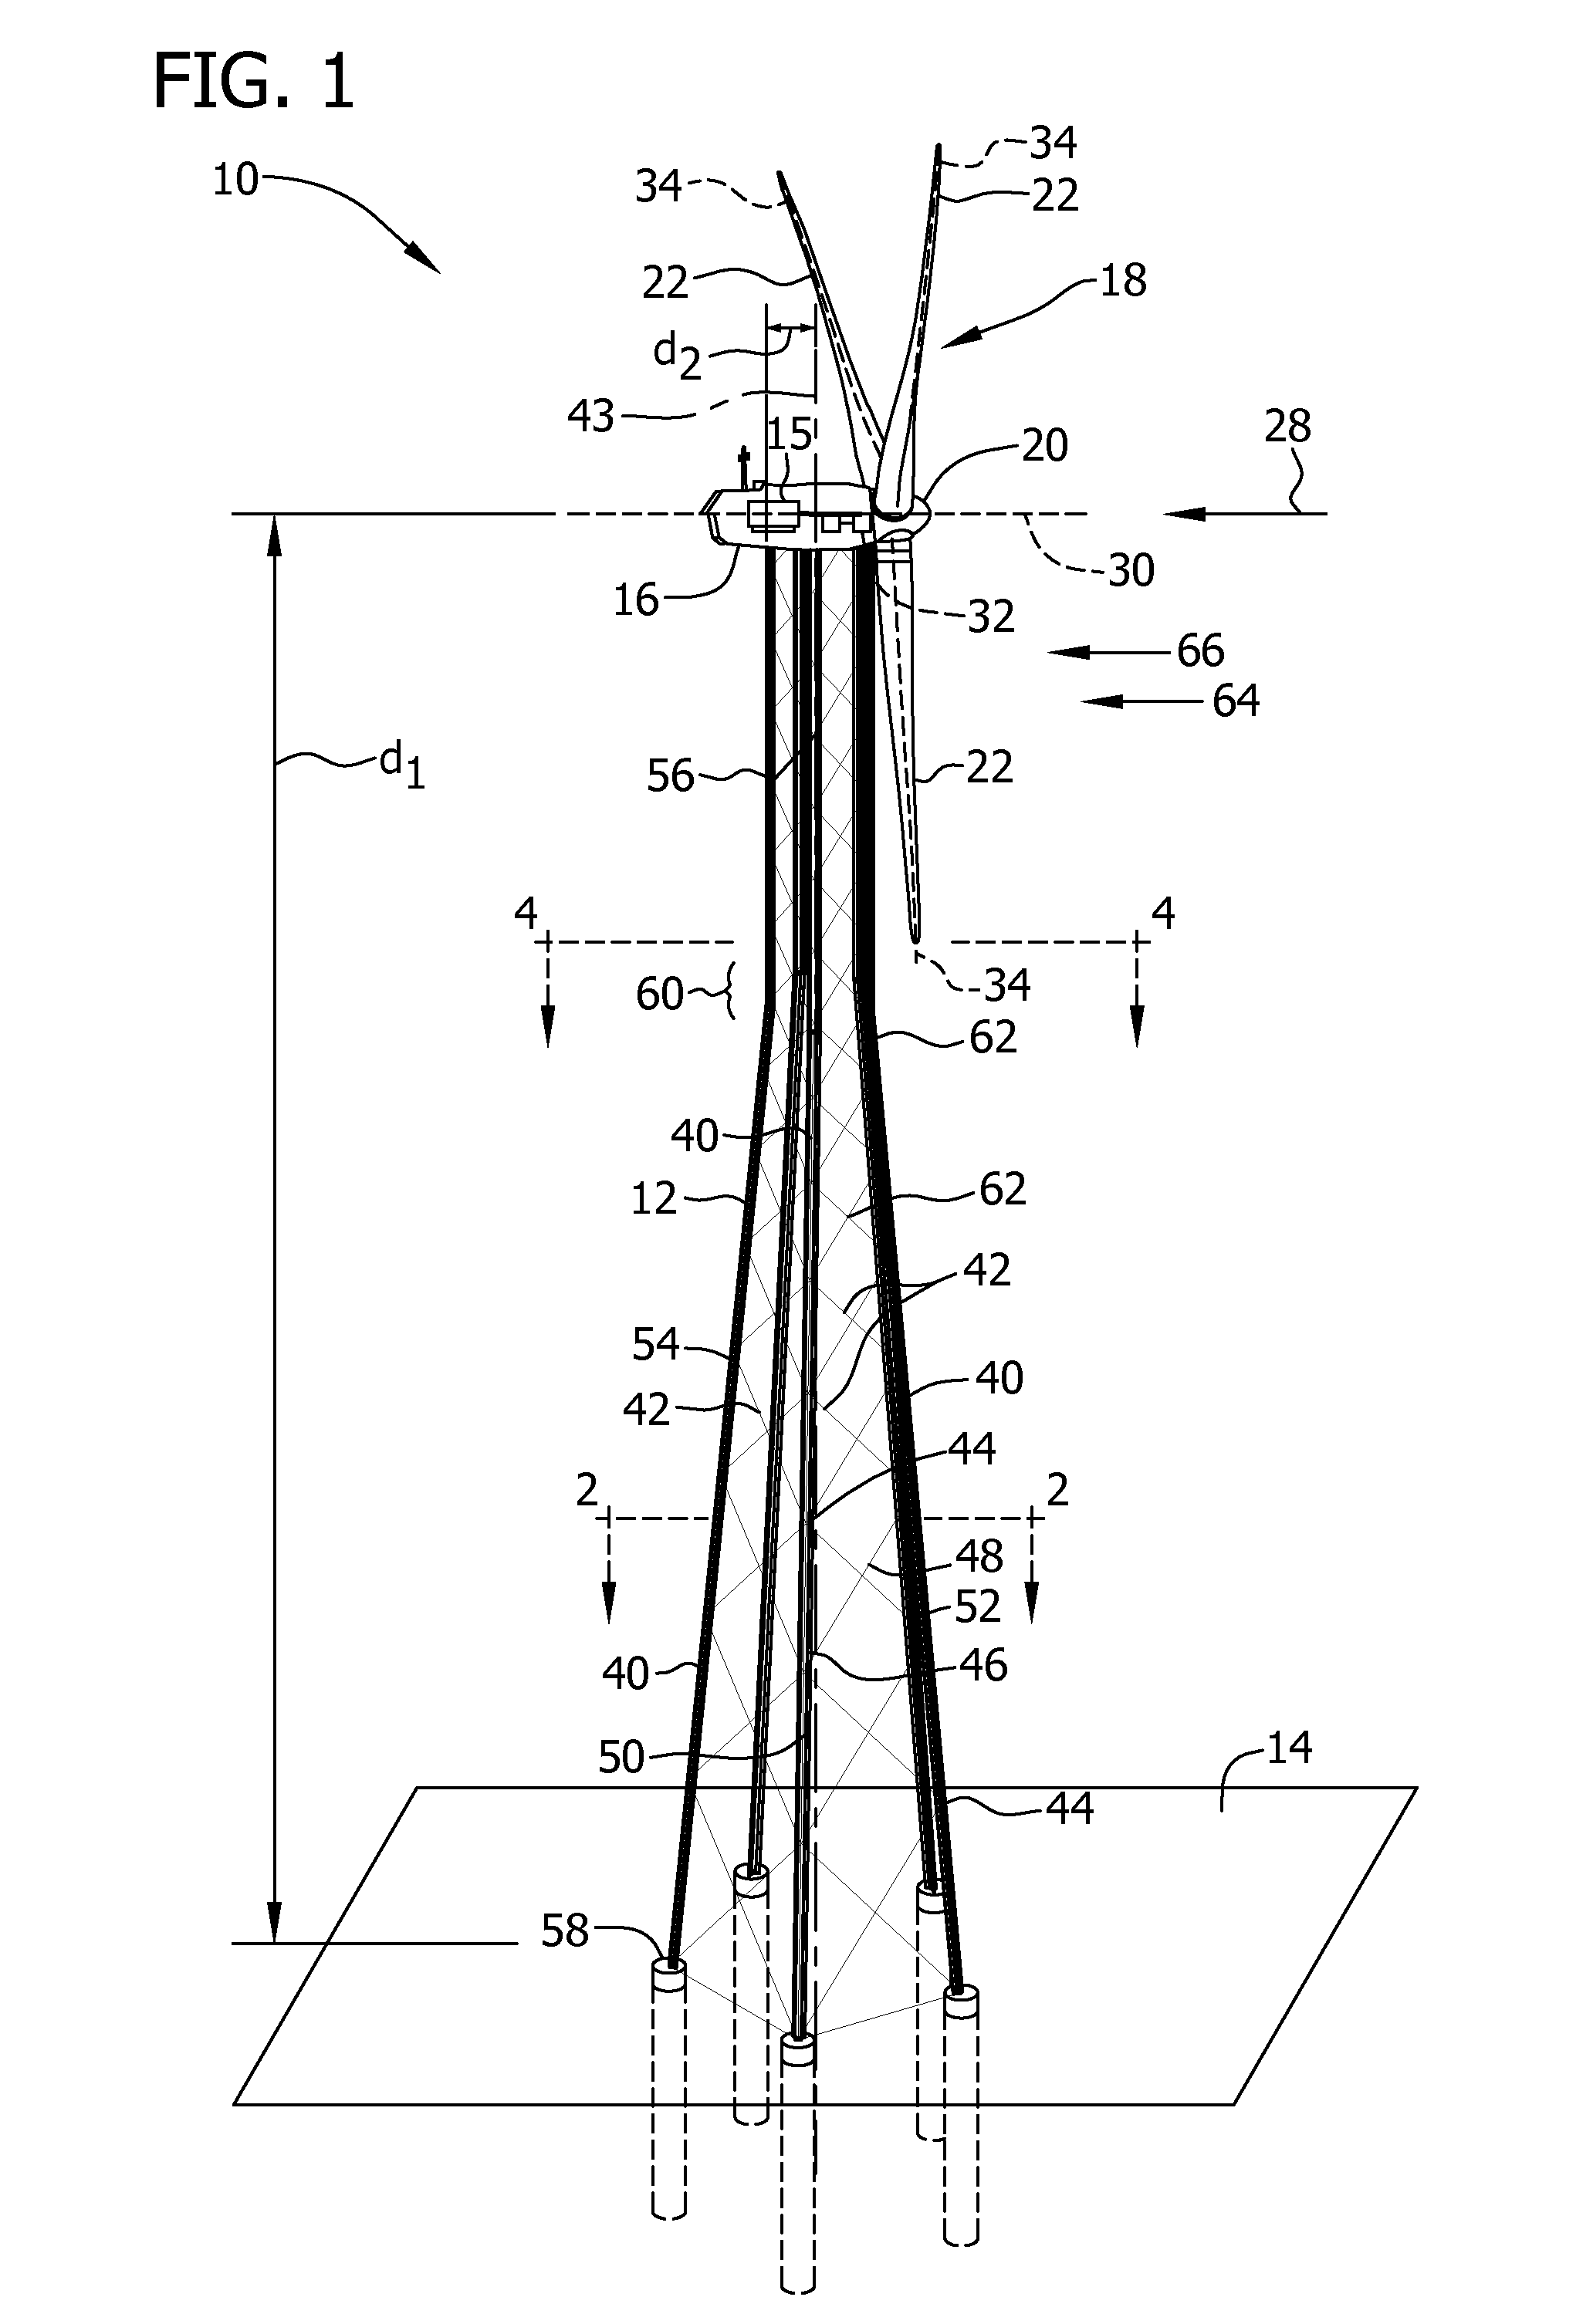 Support tower for use with a wind turbine and system for designing support tower